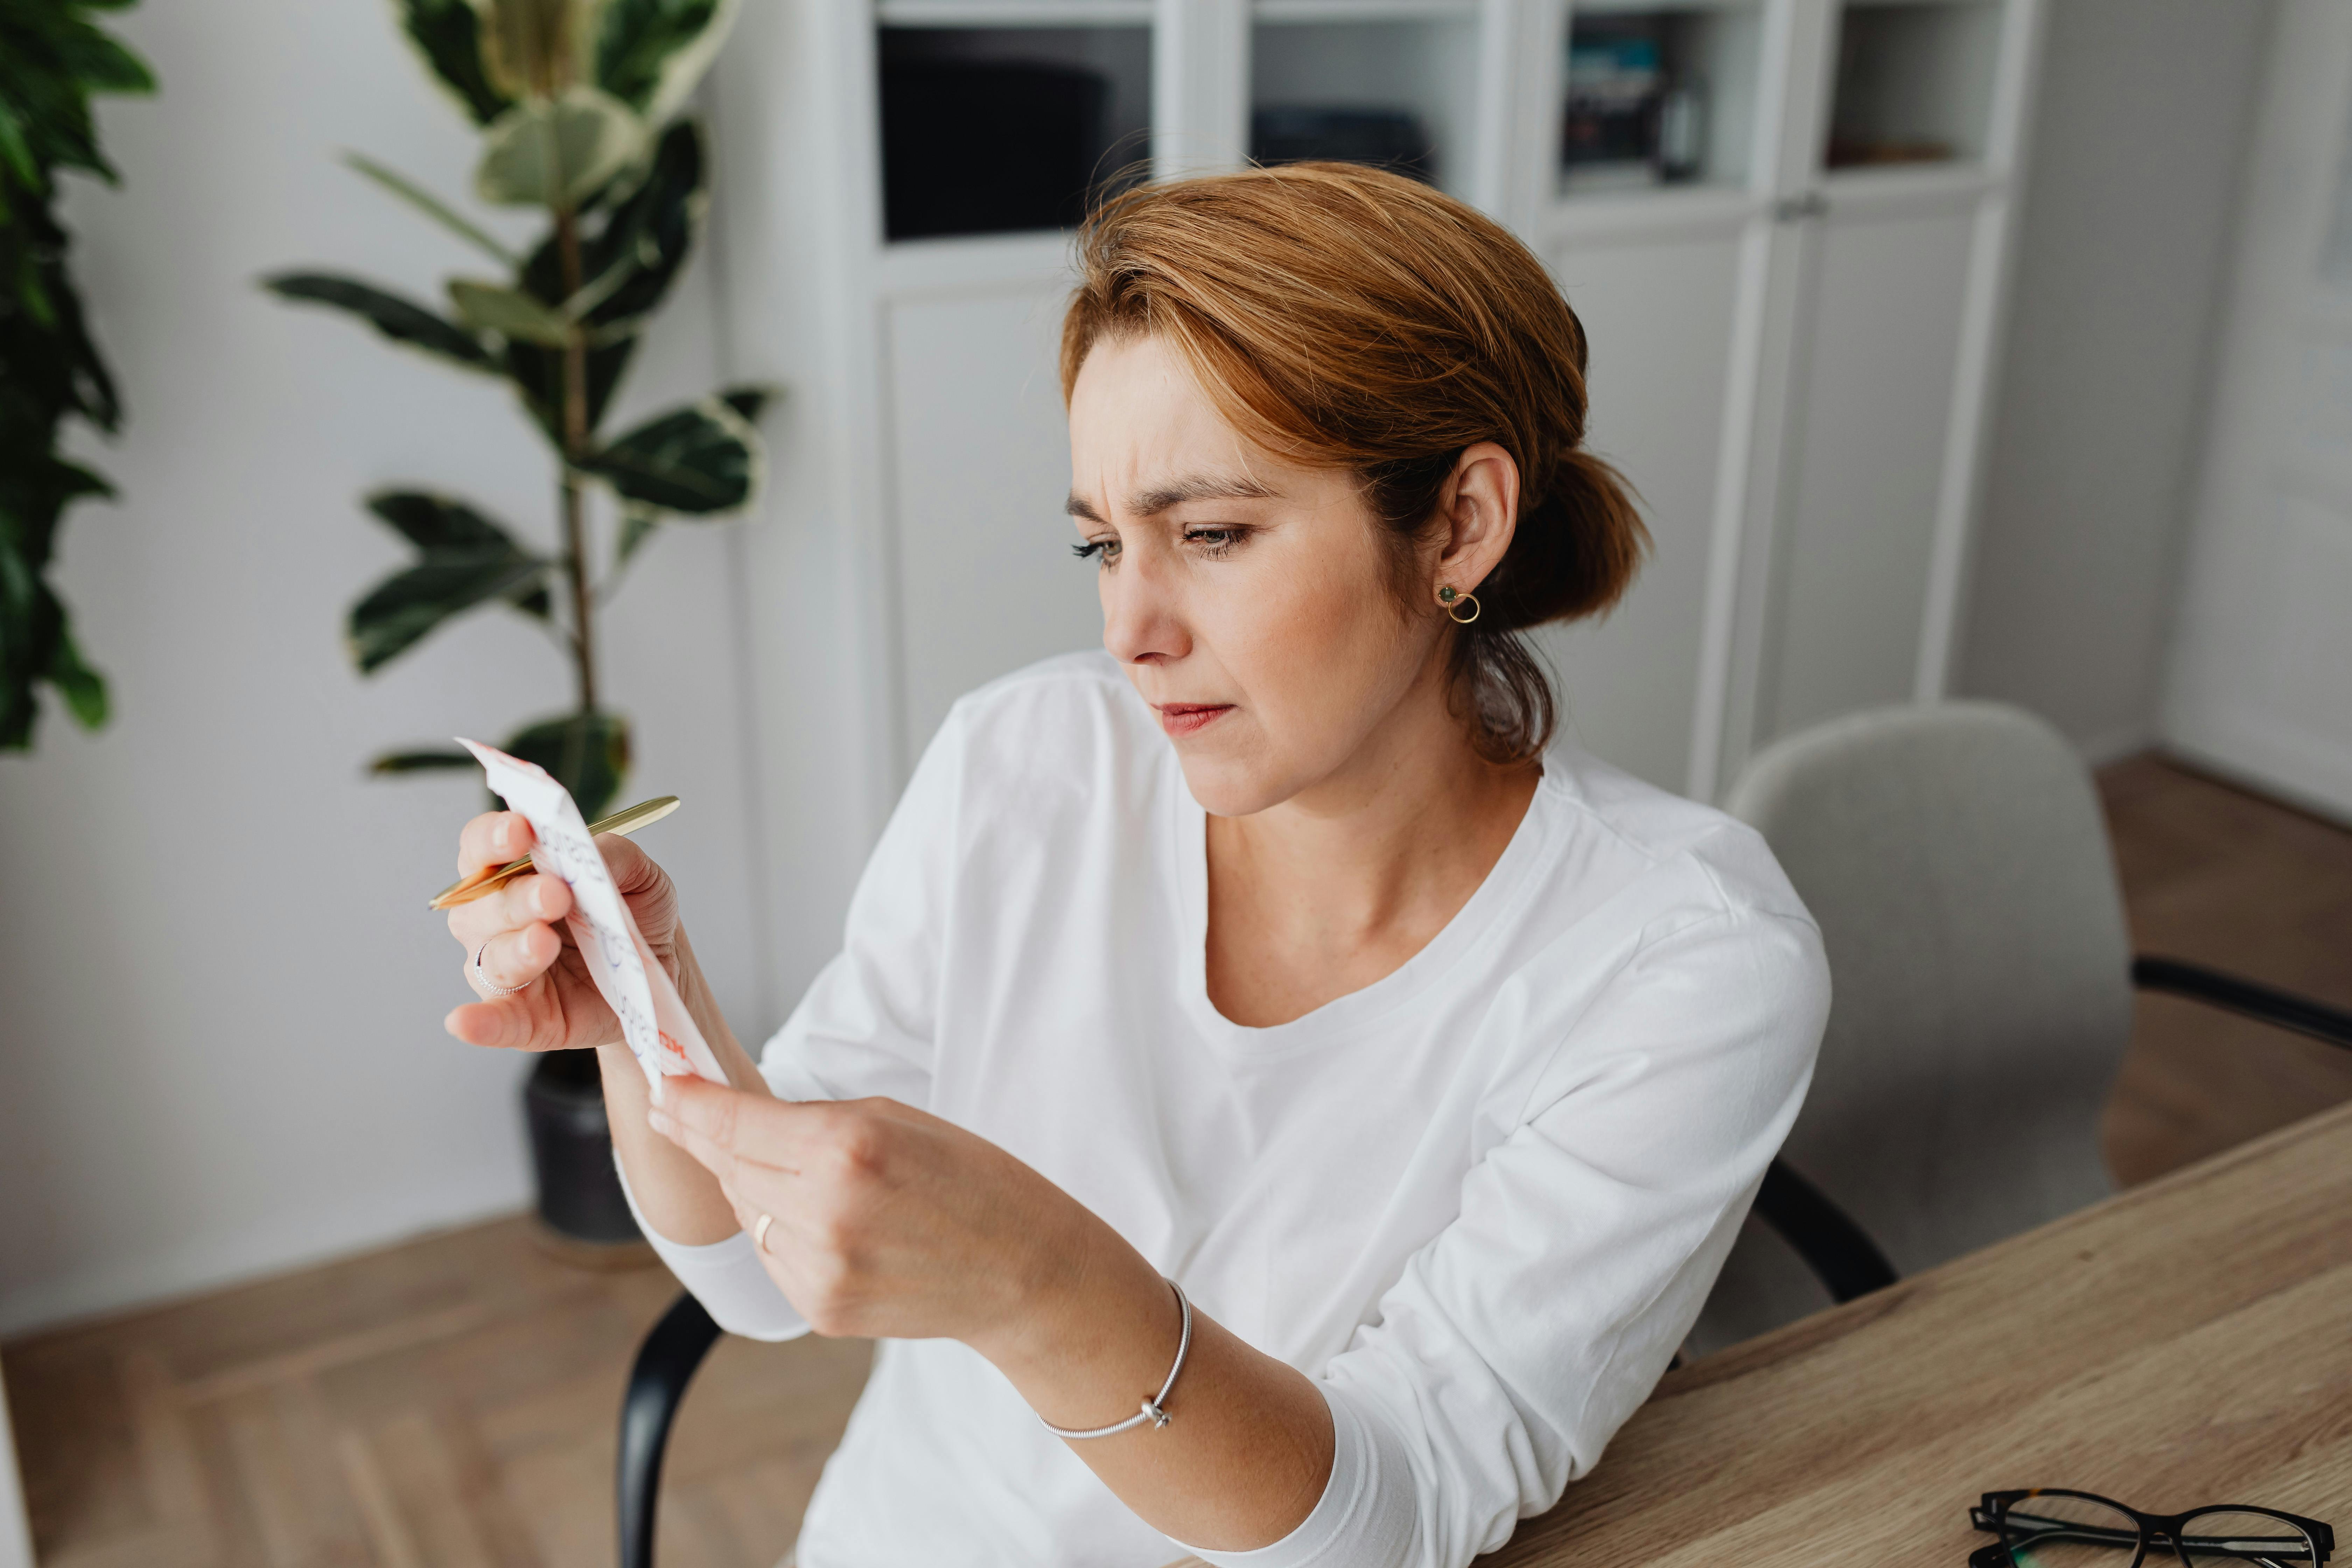 A confused woman looking at a receipt | Source: Pexels